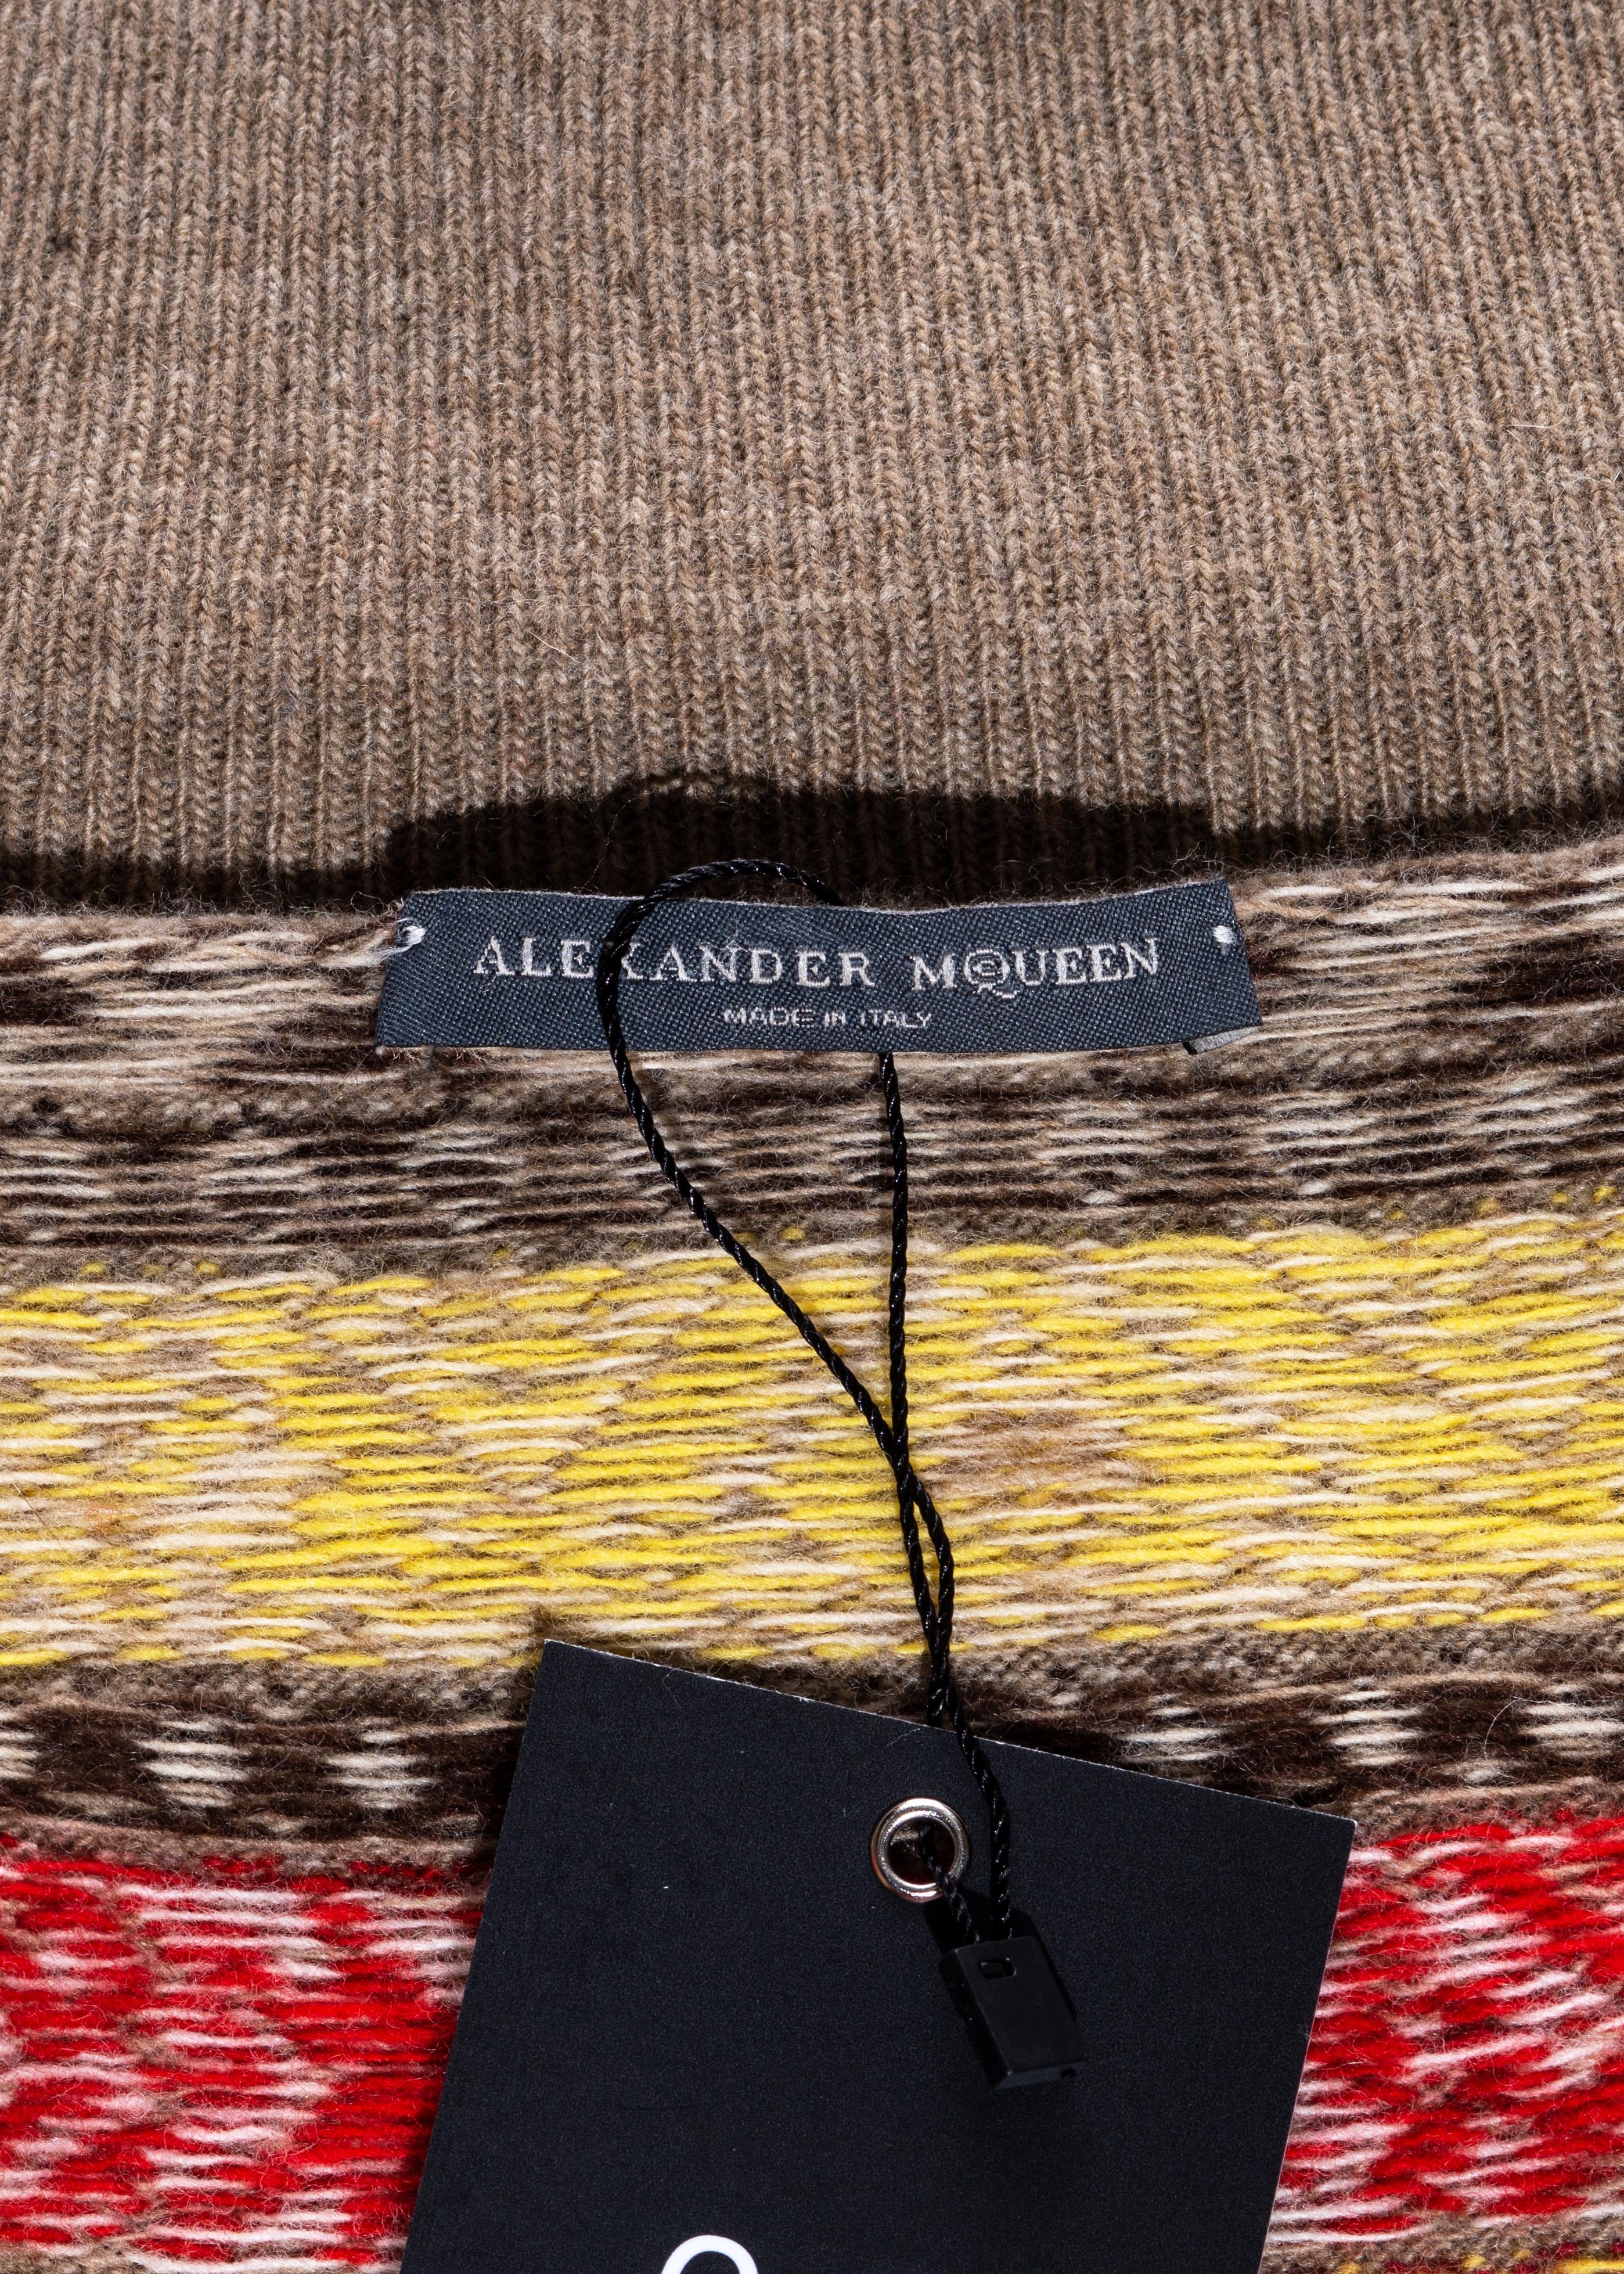 Alexander McQueen multicoloured knitted wool cardigan, fw 2005 4